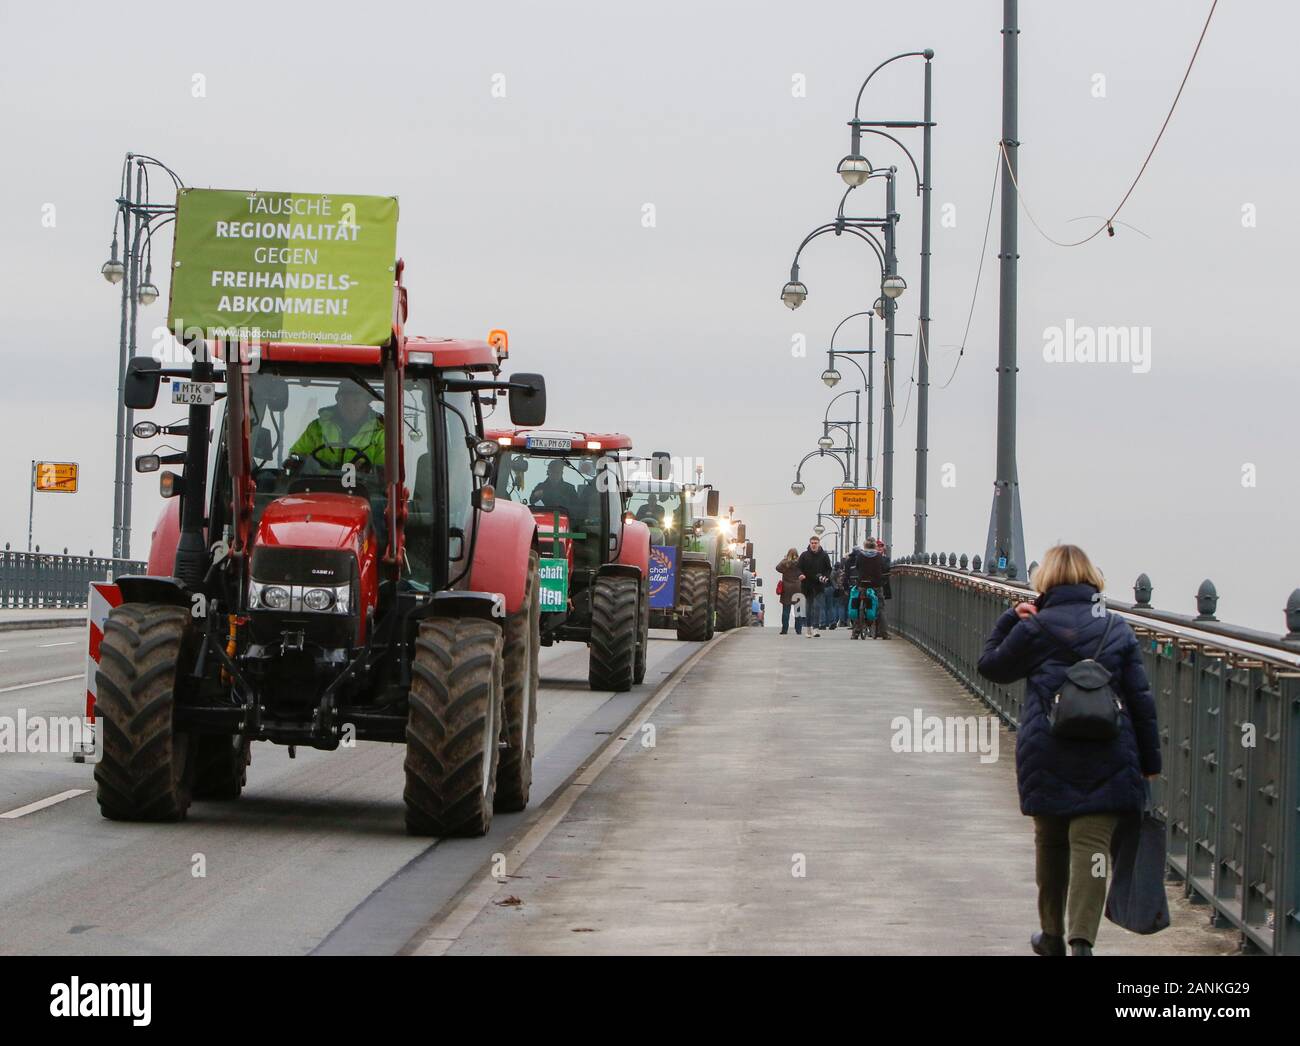 Mainz, Germany. 17th January 2020. Tractors cross the Theodor-Heuss-Bridge from Hesse into Mainz. A poster that reads “Exchange regionality for free trade agreement” hangs on the front of a tractor. Over 800 farmers with their tractor protested outside the ZDF TV station in Mainz against the media reporting of the agricultural politics. Afterwards they try to create the world wide longest mobile tractor chain by driving from the TV station through Rhenish Hesse, to protest against the new fertiliser regulations. Stock Photo